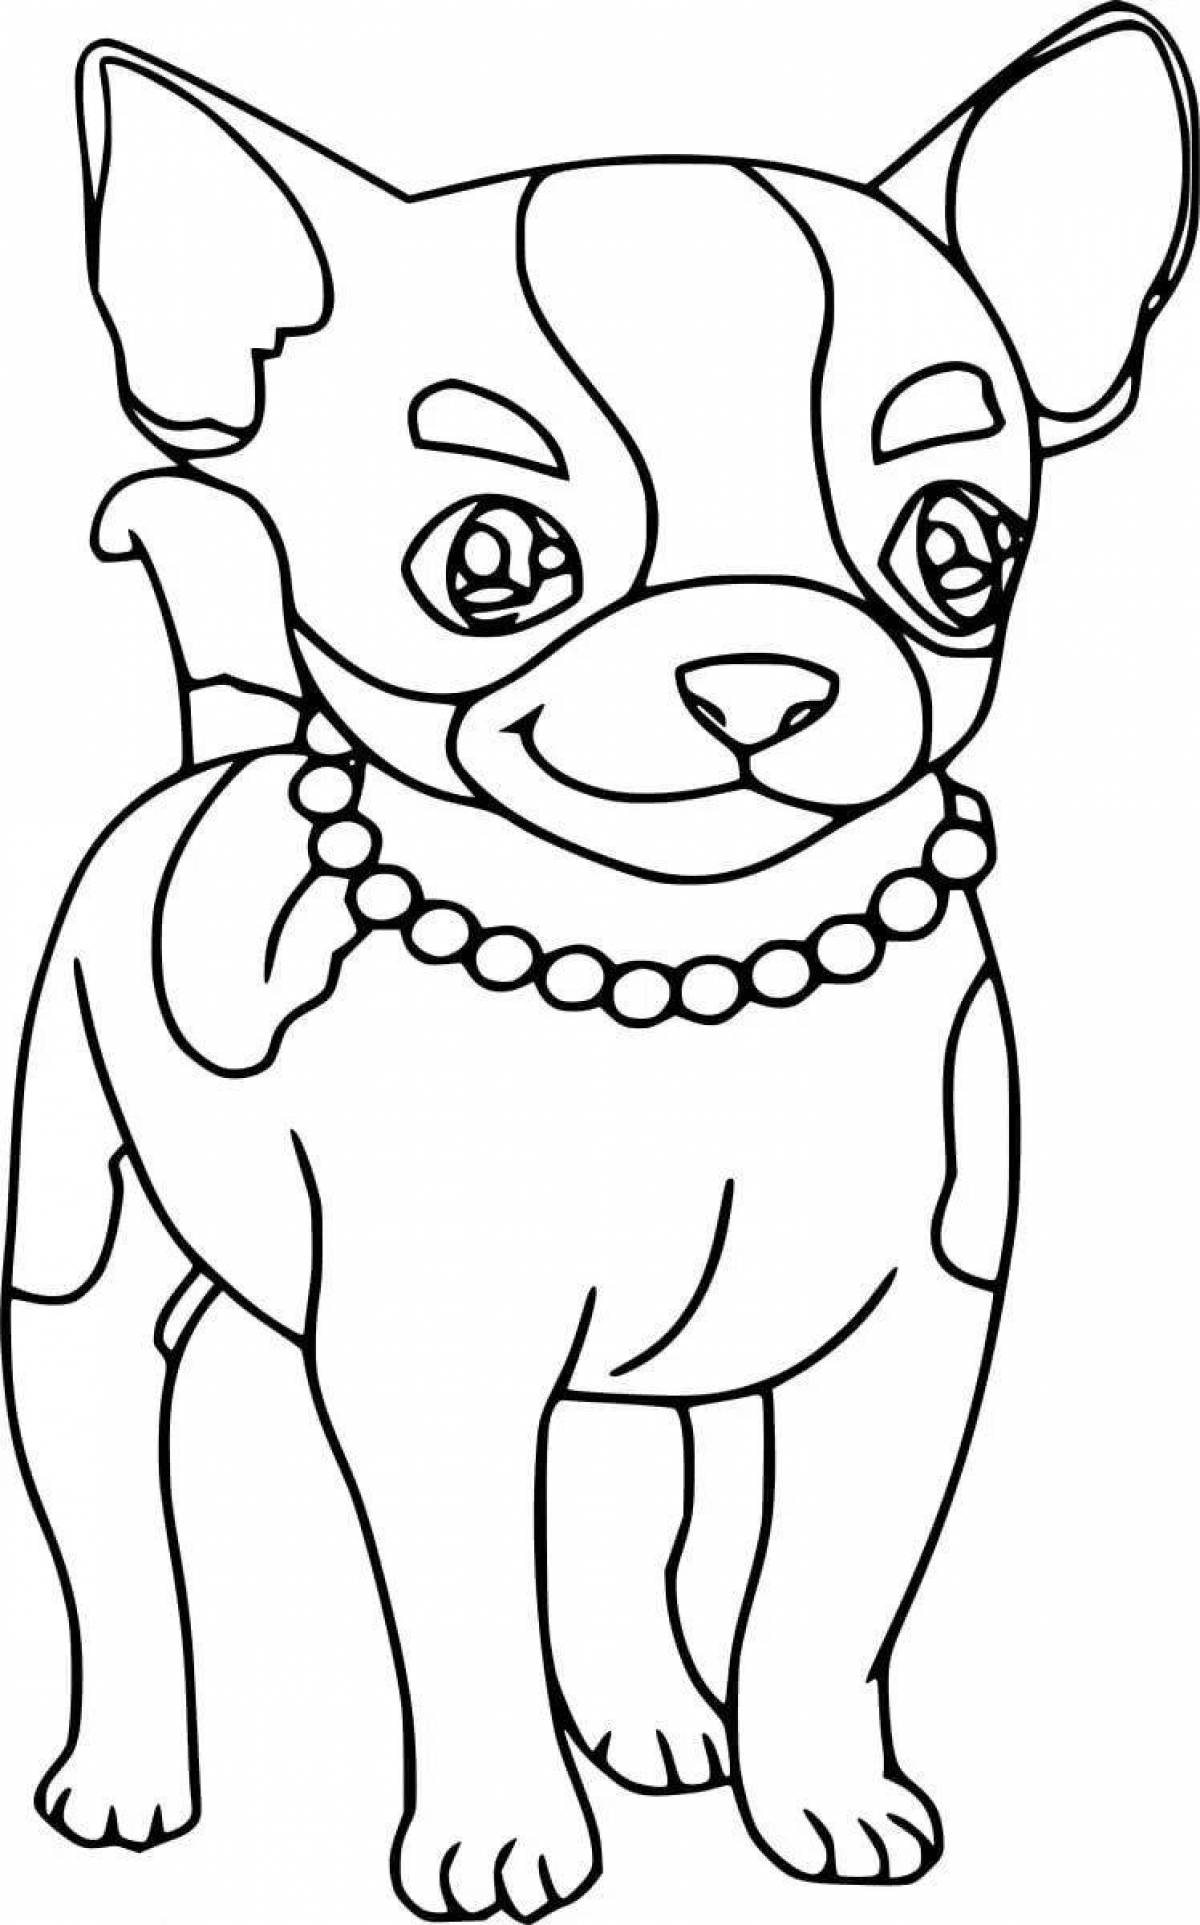 An unusual Chihuahua coloring book for kids